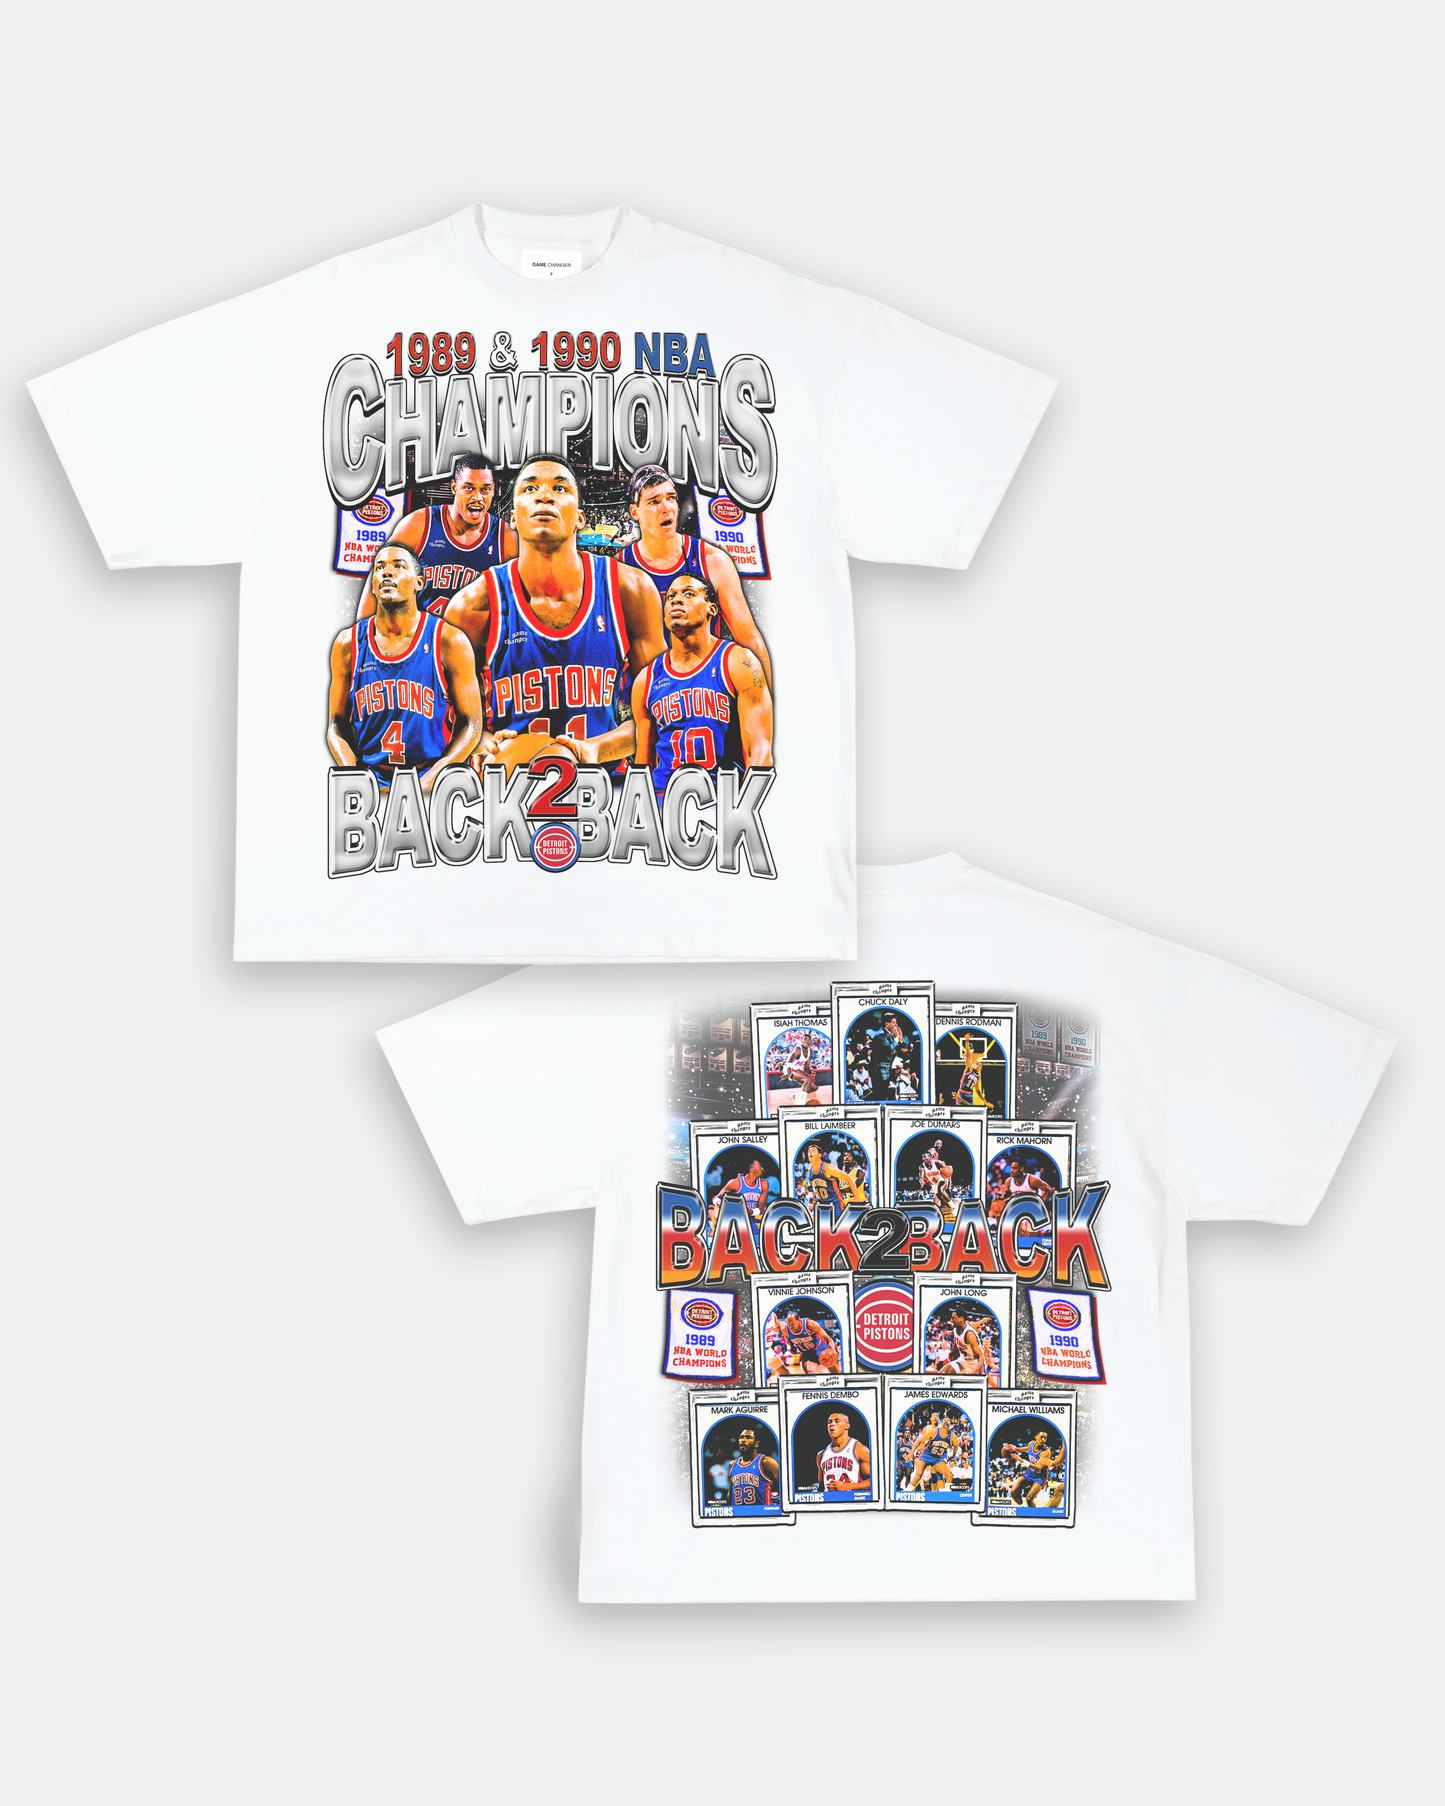 89 & 90 NBA CHAMPS TEE - [DS]